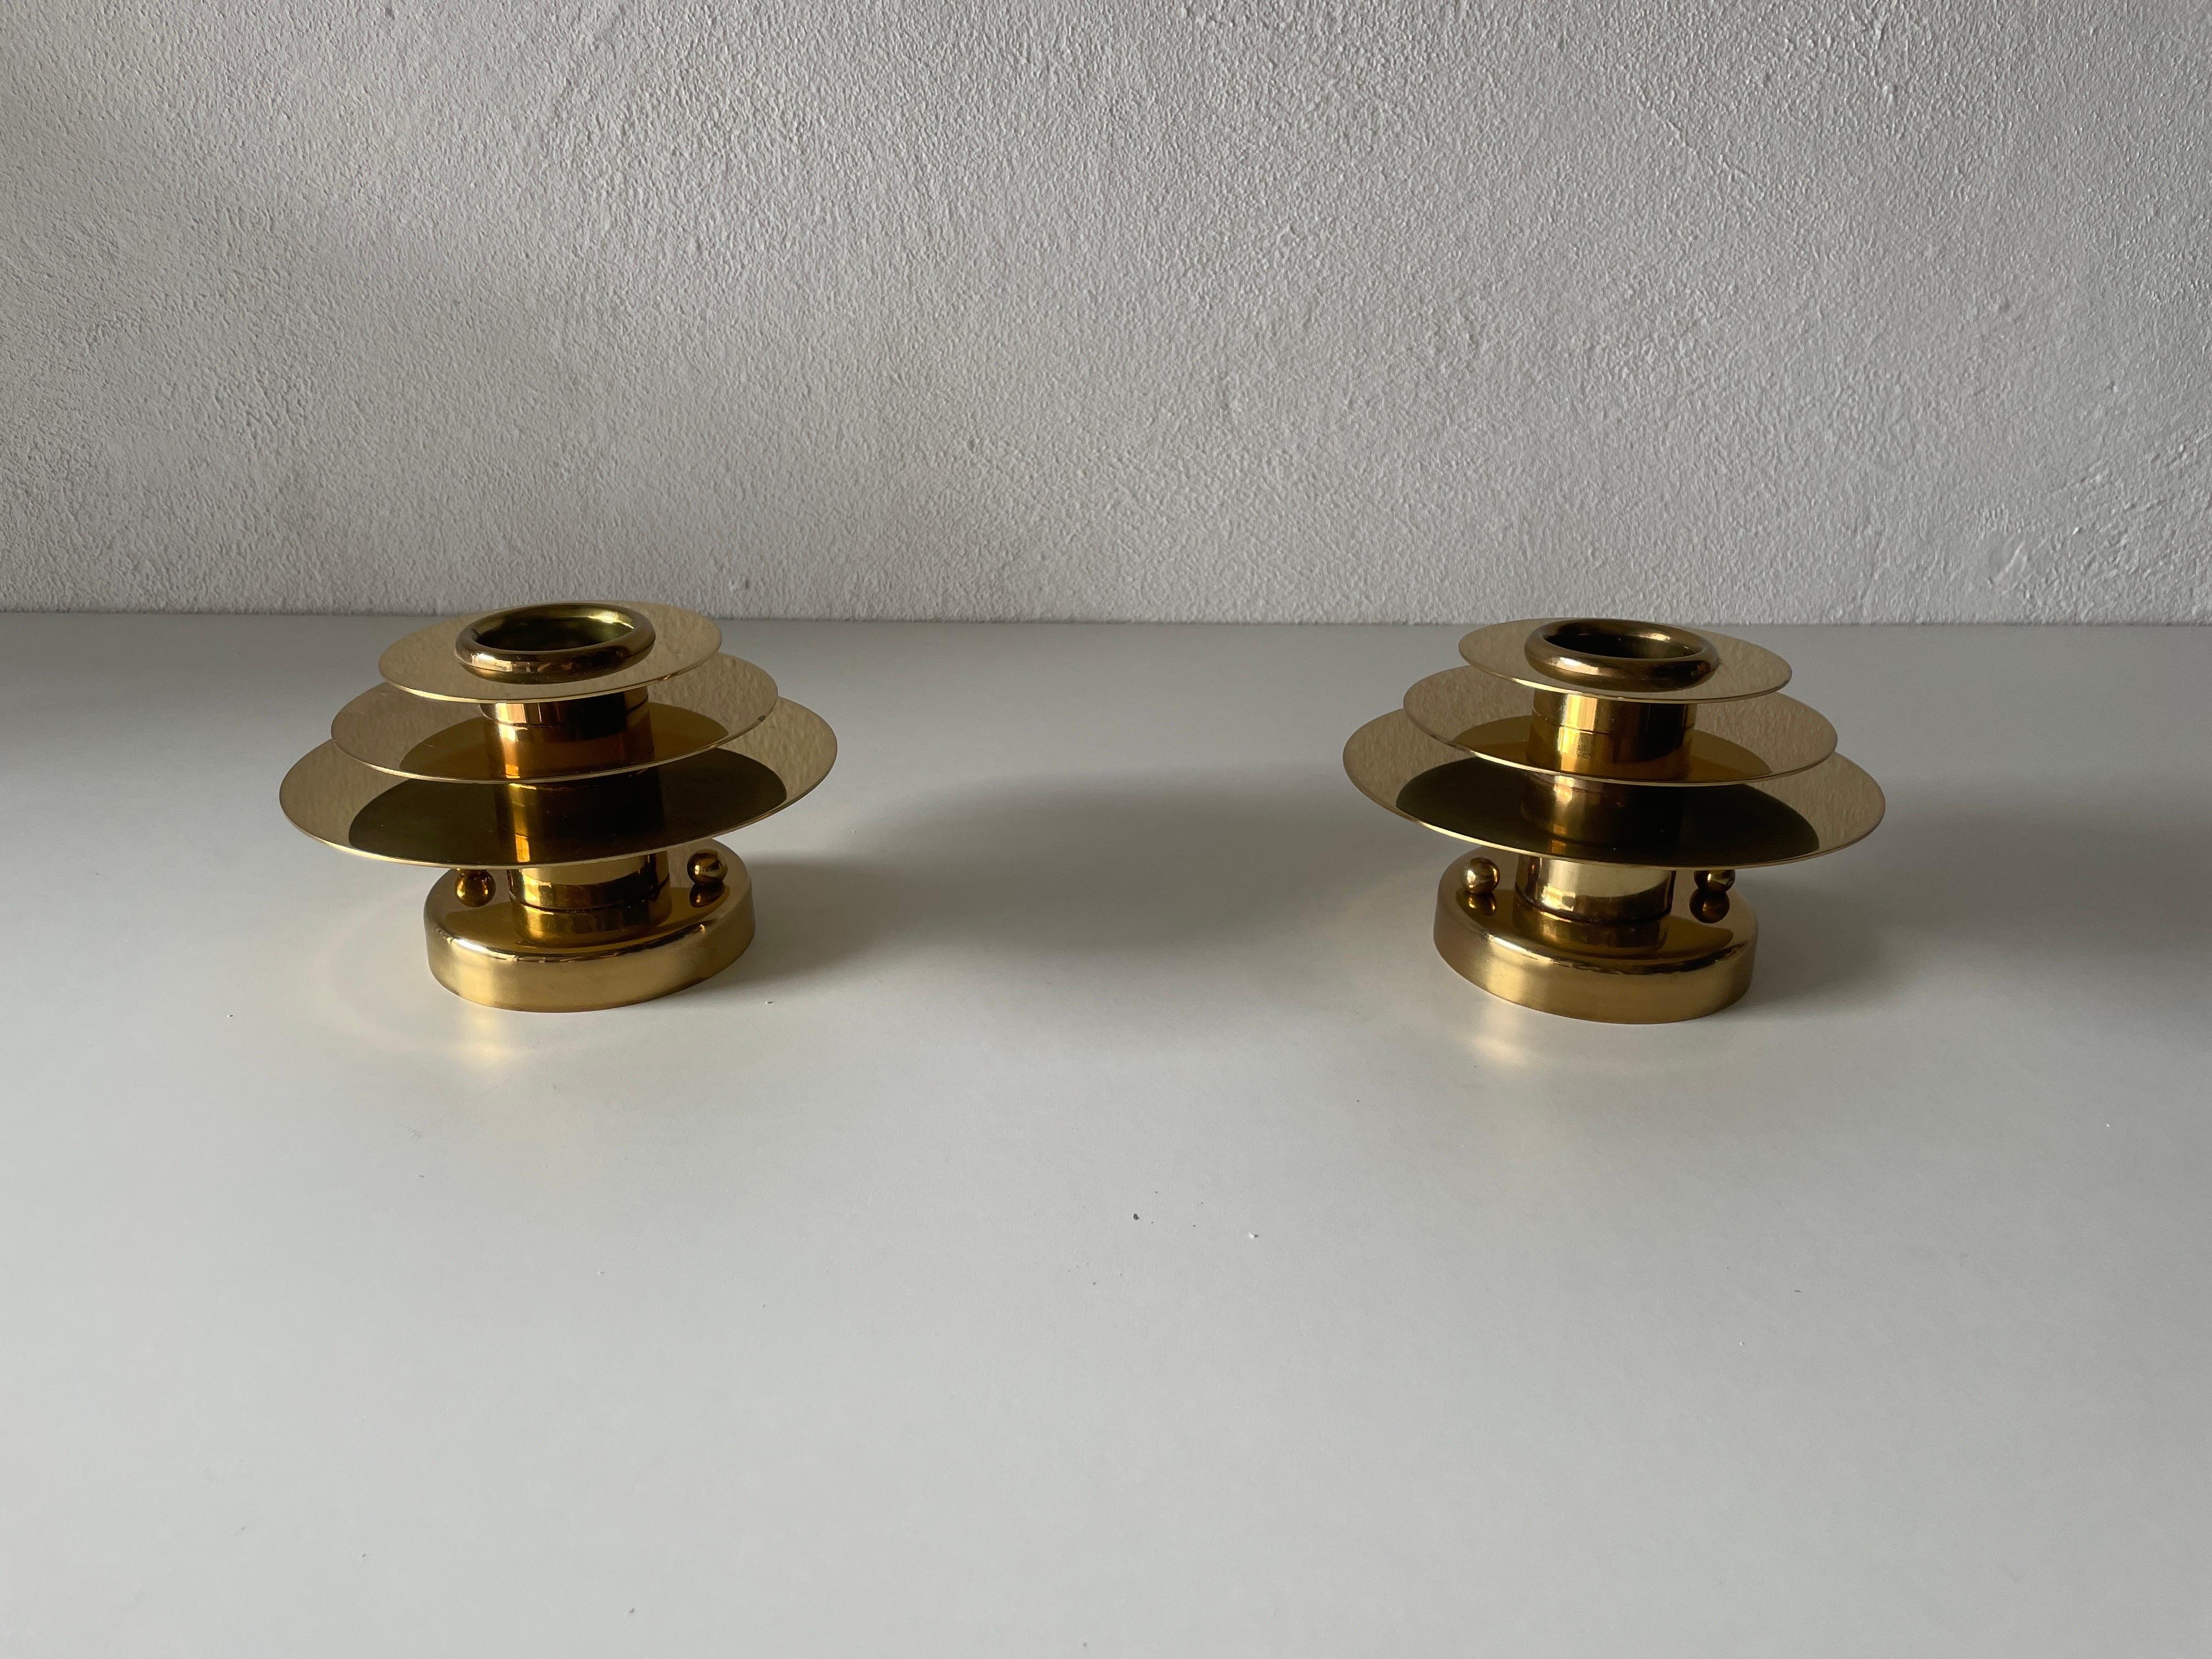 Space Age Modernist Brass Pair of Sconces or Ceiling Lamp by Schröder & Co, 1960s, Germany For Sale